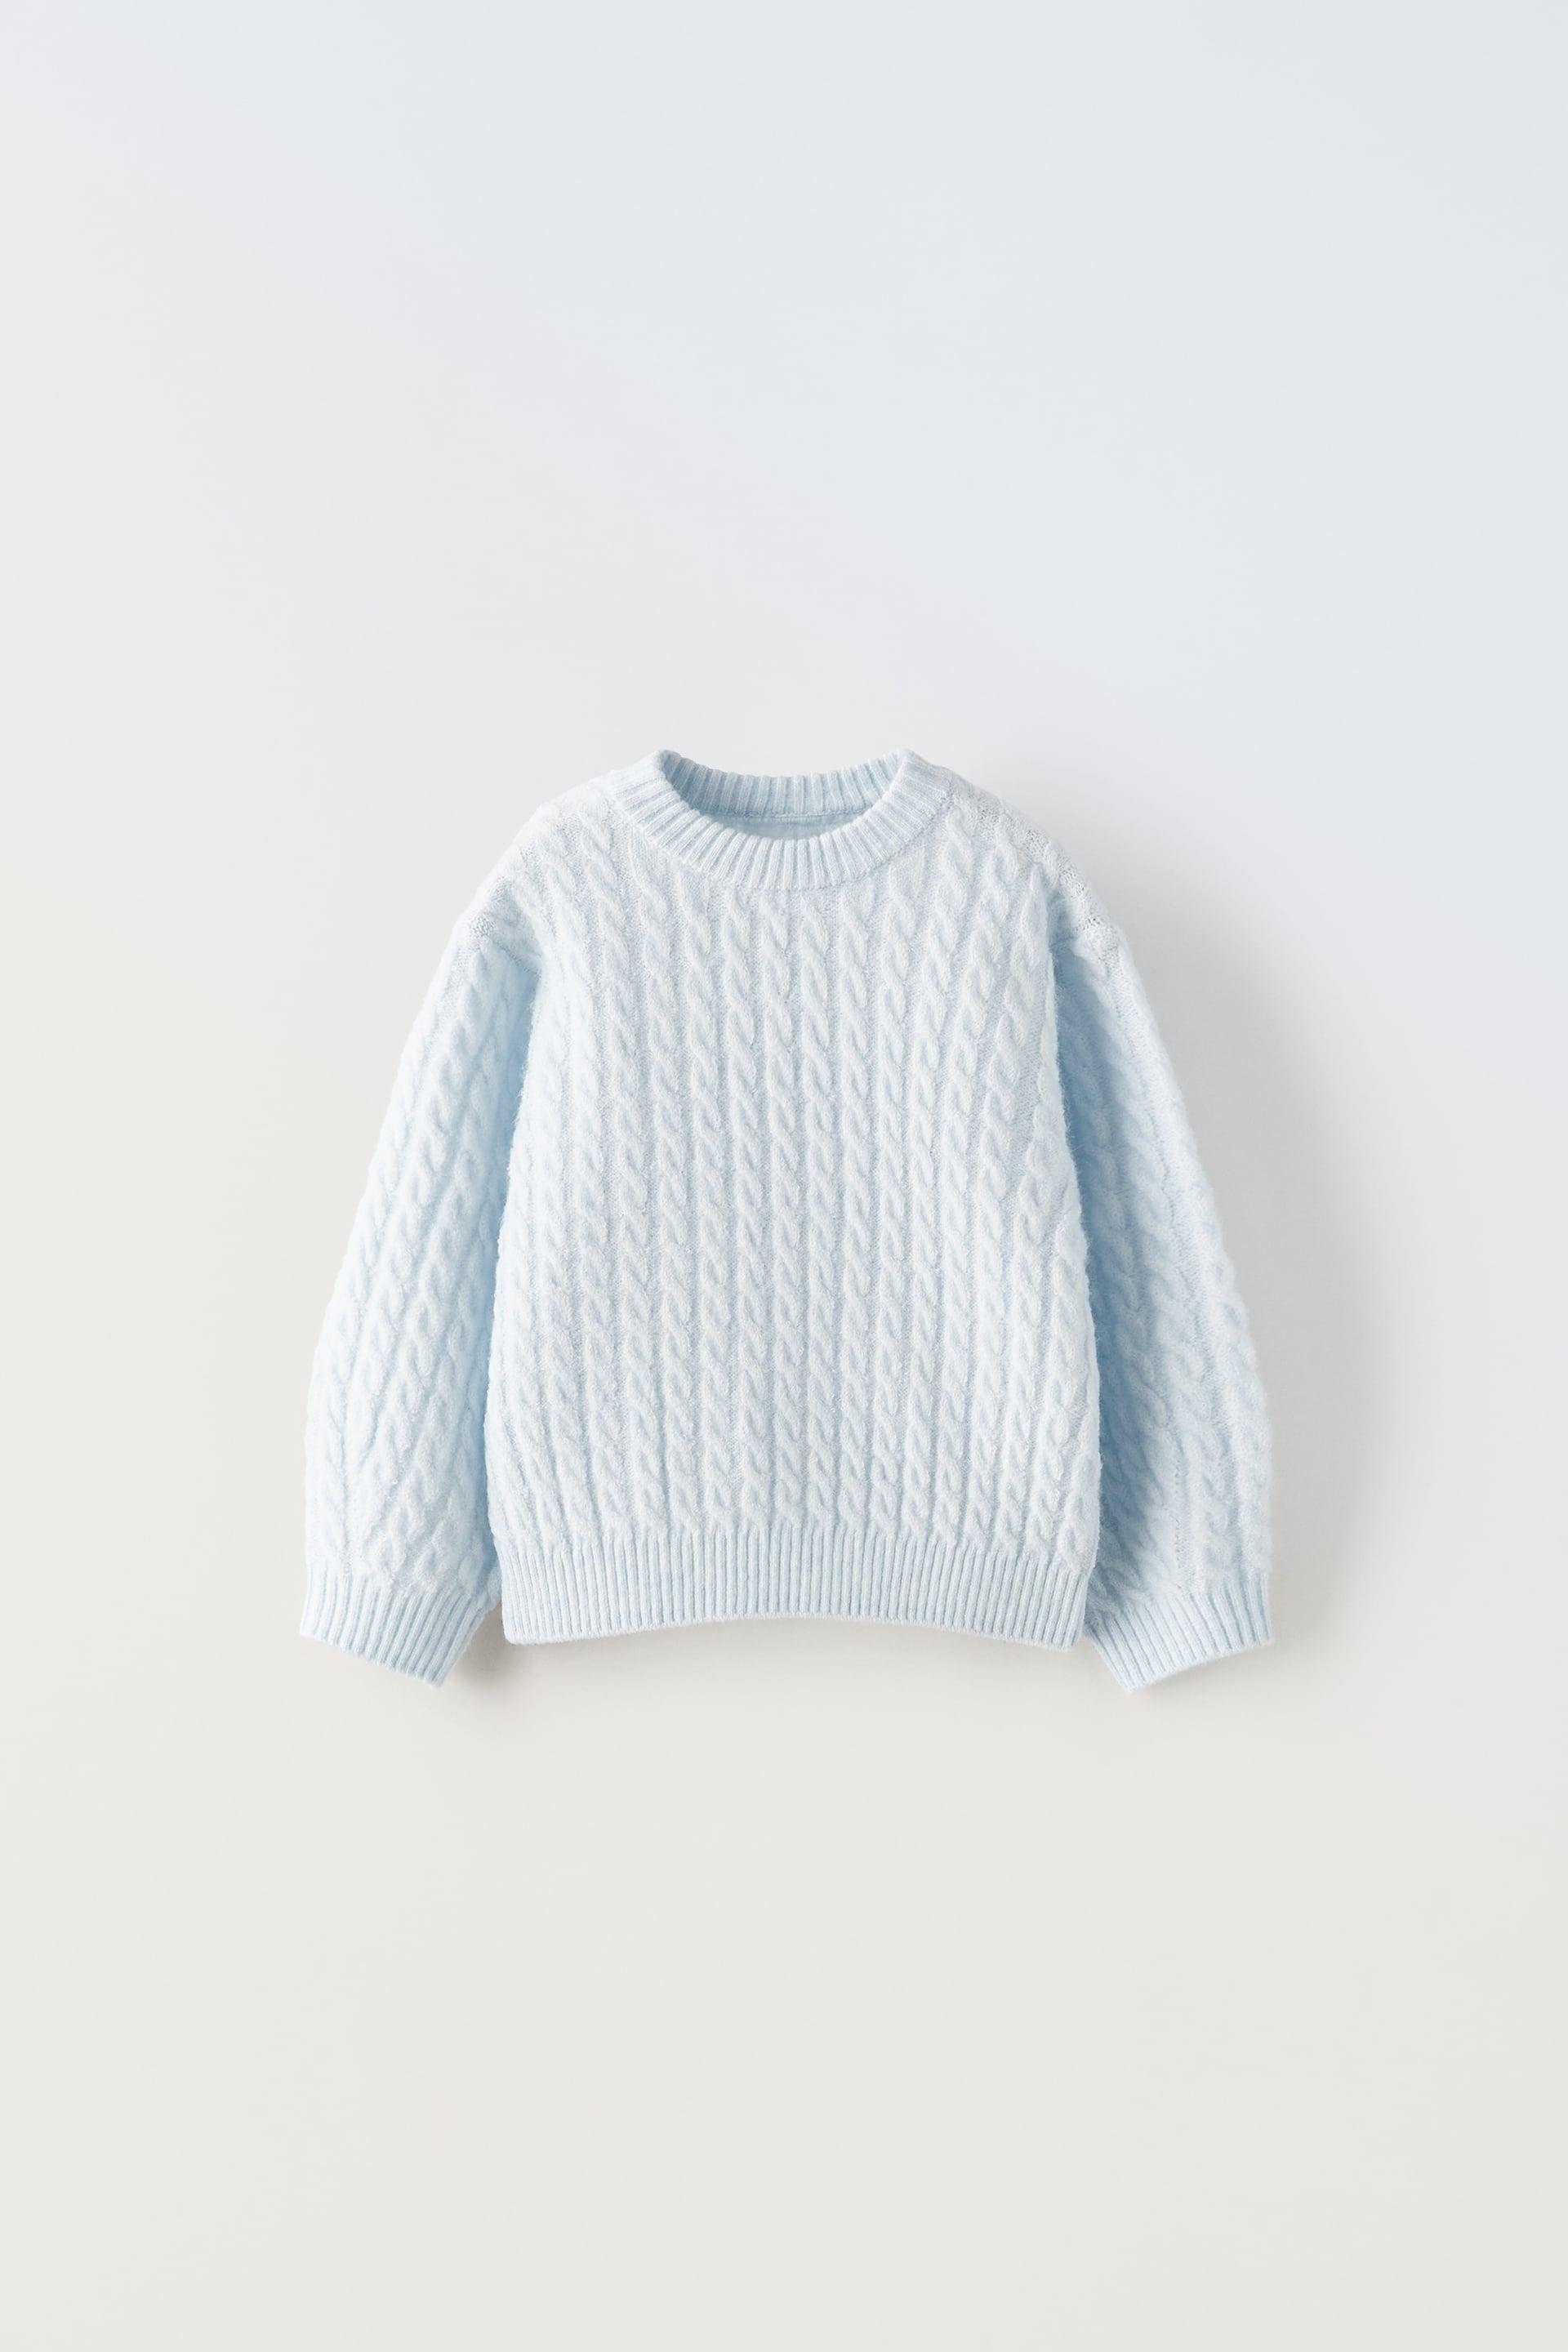 CABLE KNIT SWEATER by ZARA